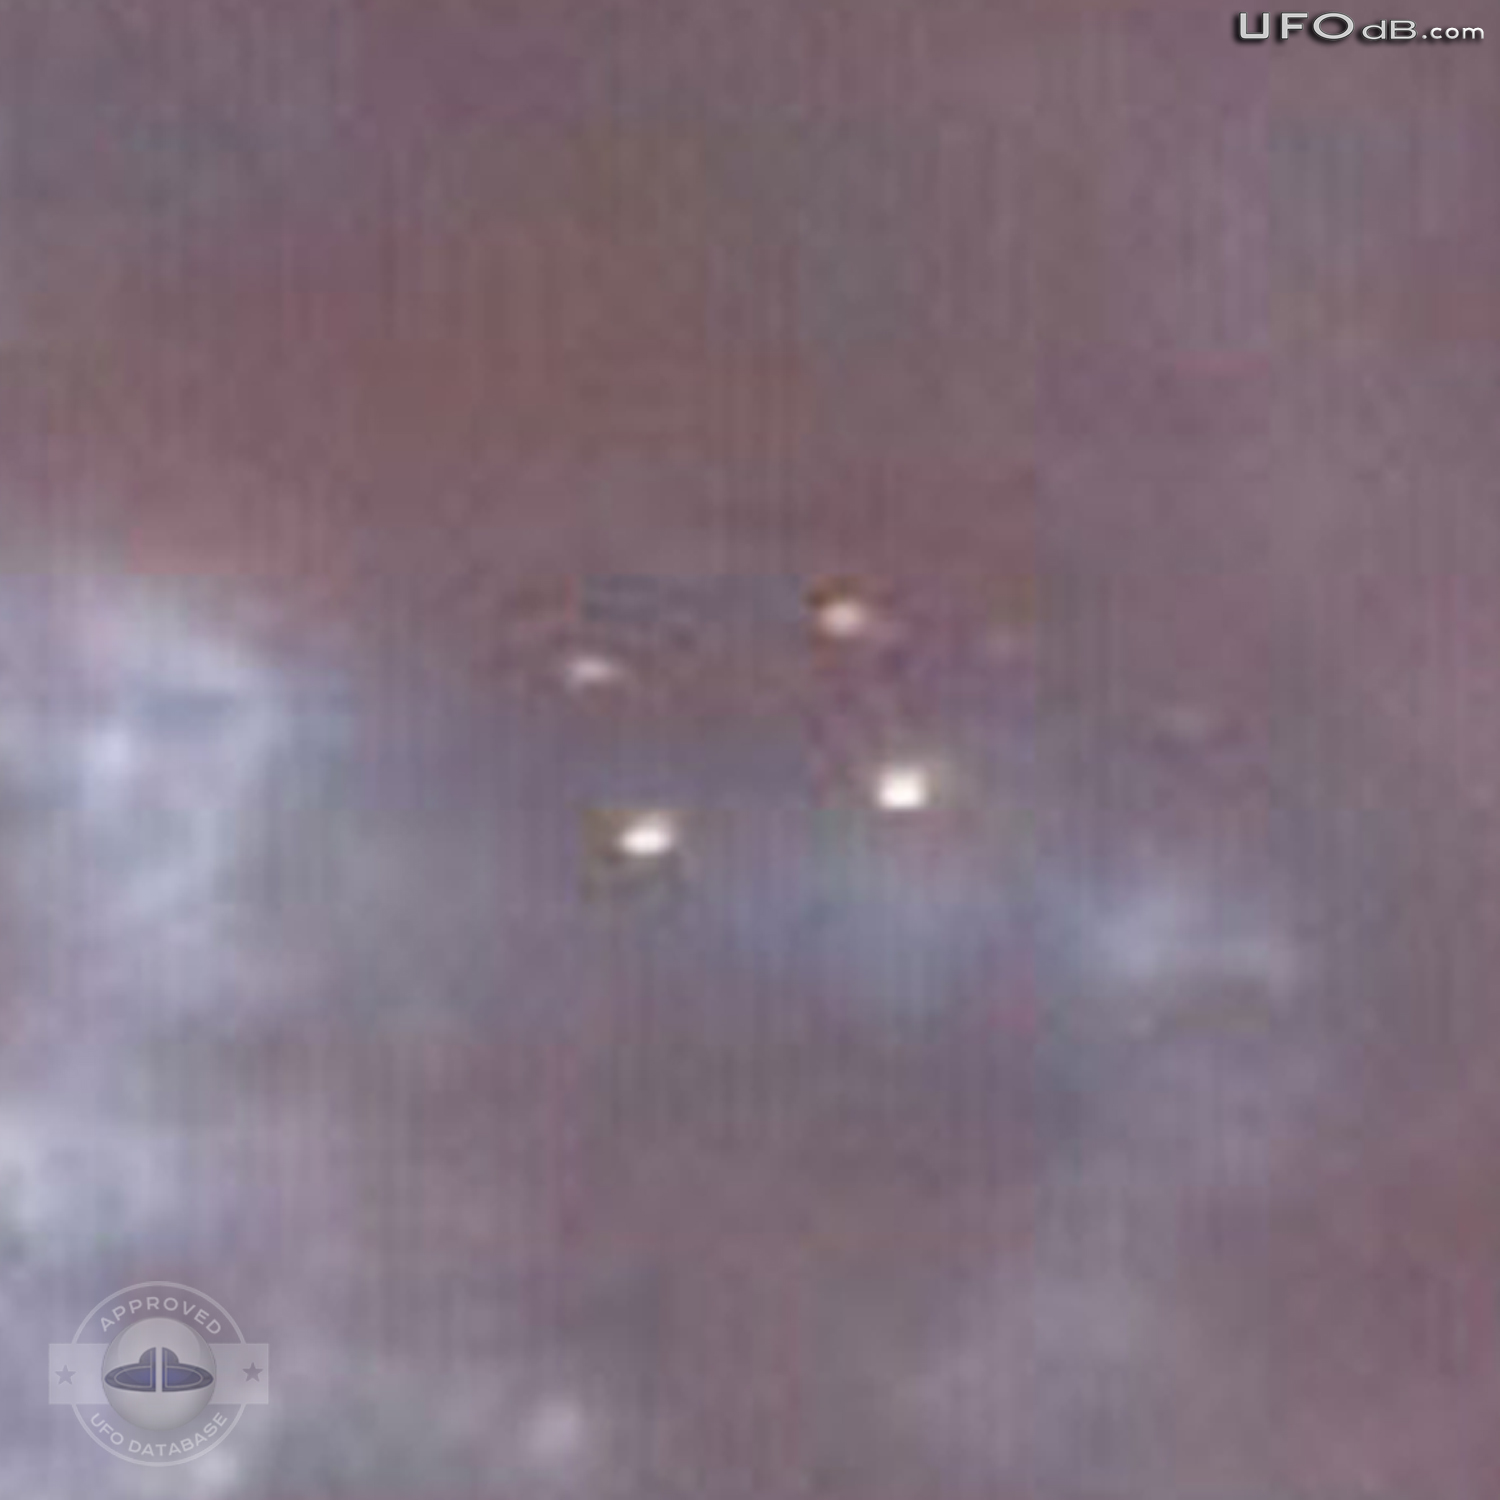 A picture from Madisonville show a UFO hiding in the clouds | USA 2011 UFO Picture #277-4